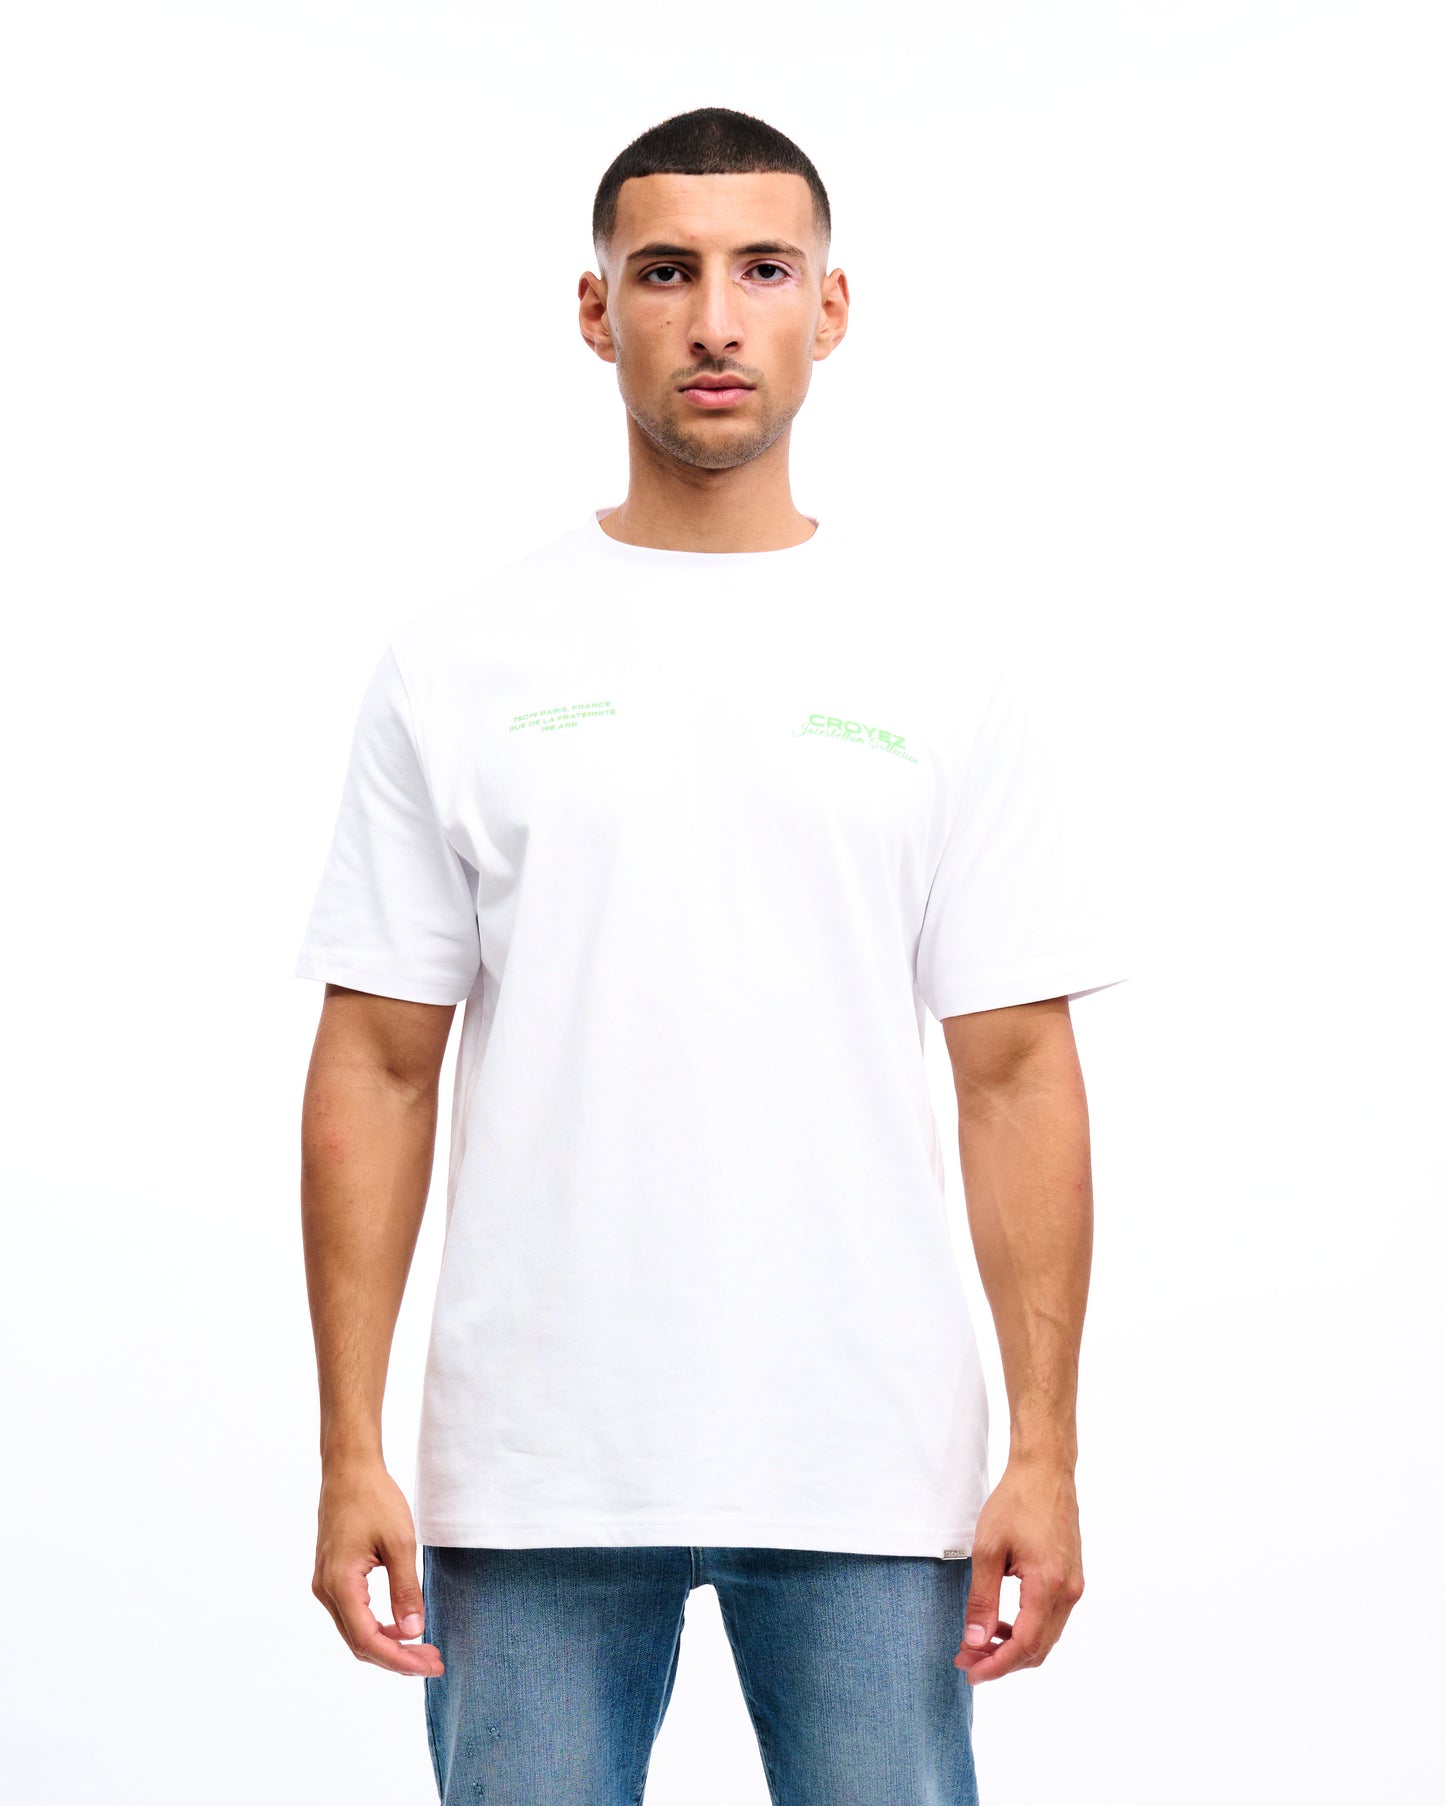 CROYEZ COLLECTION T-SHIRT - WHITE/GREEN